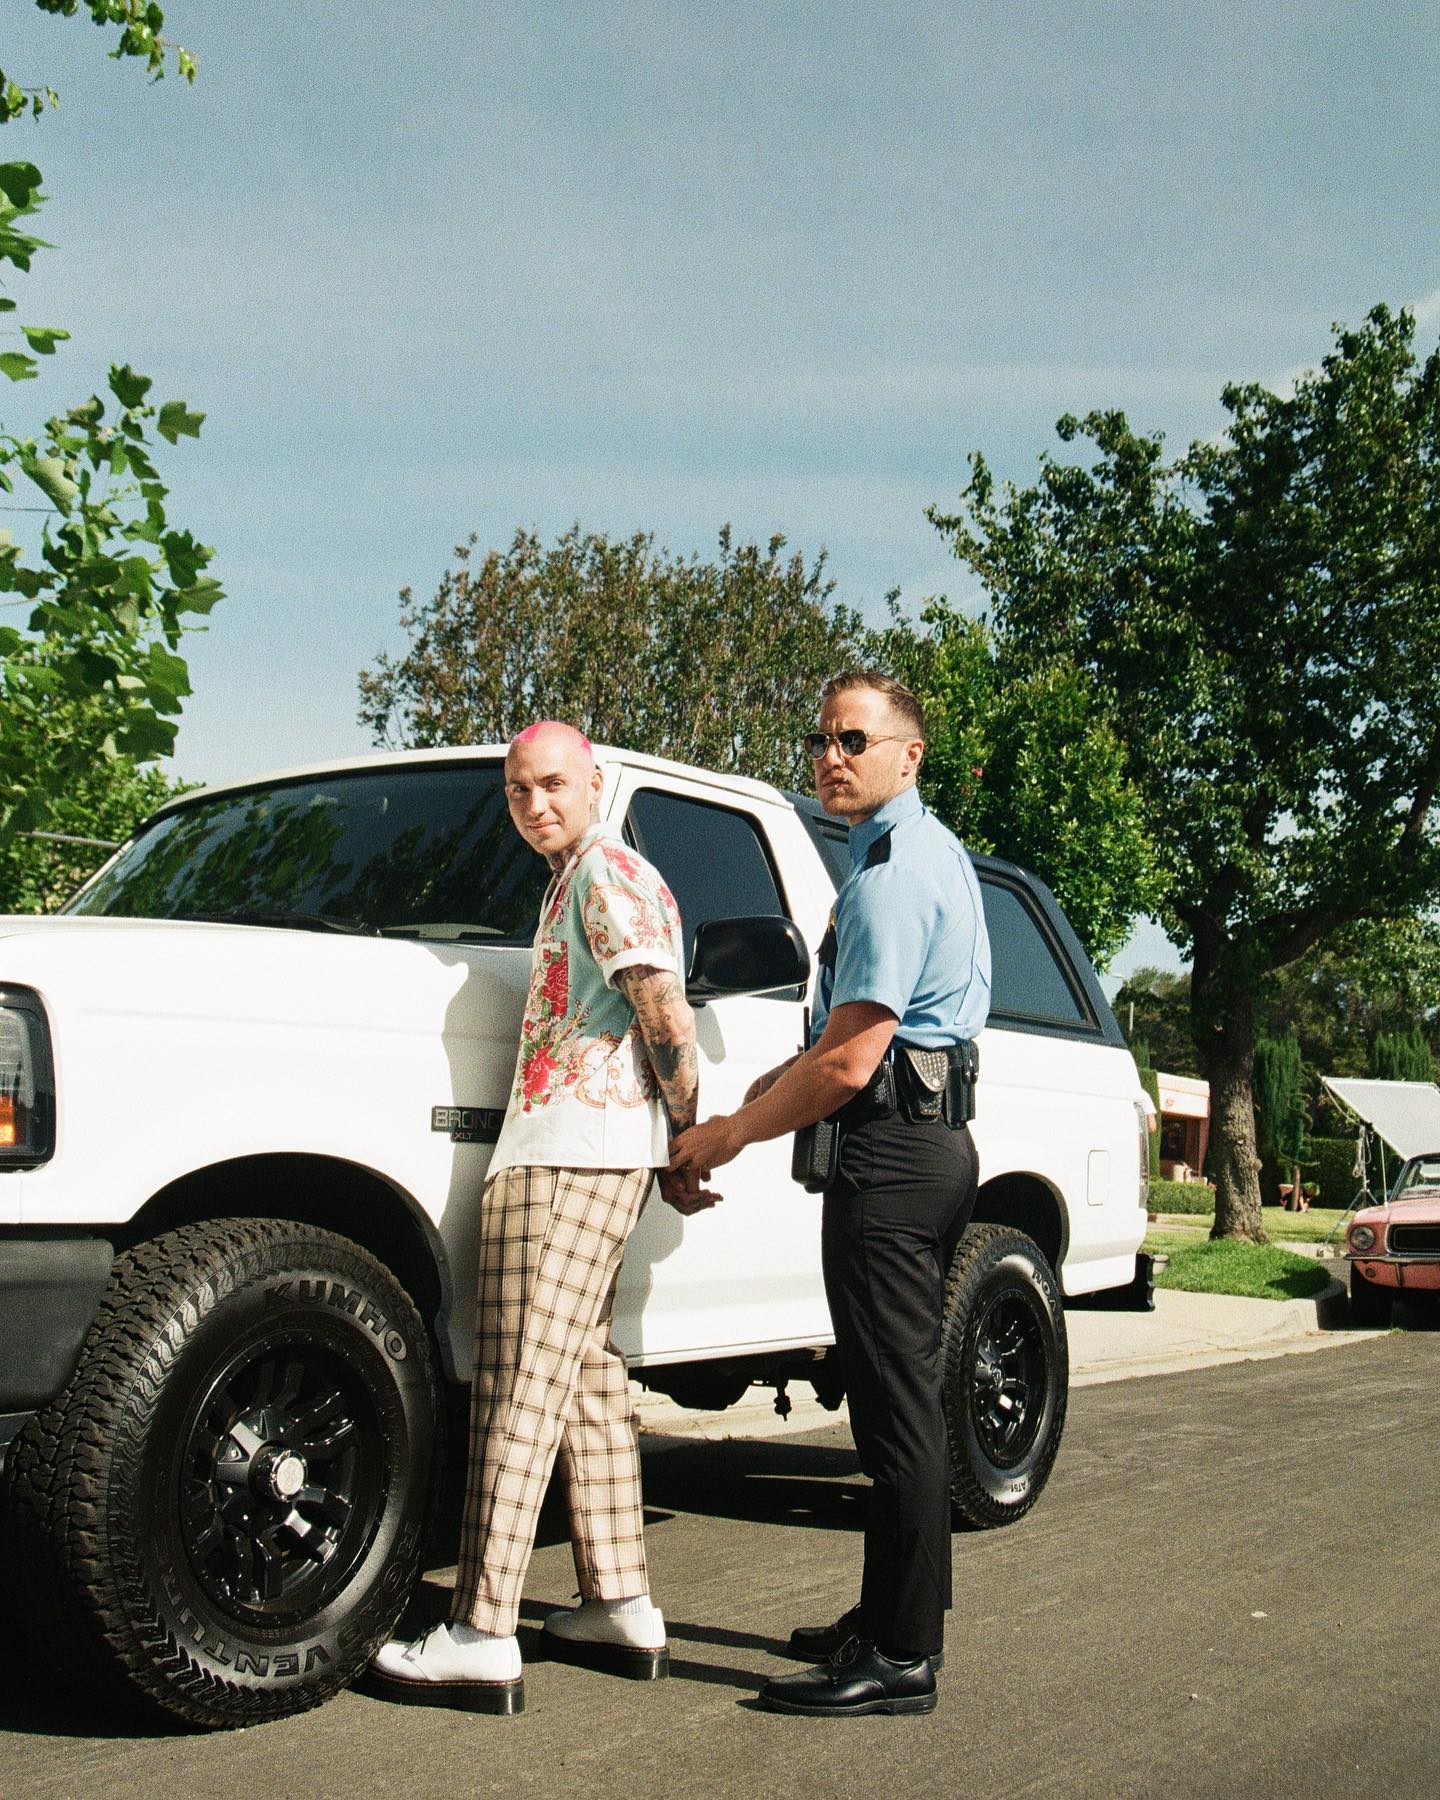 Mike Posner plays a Policeman in blackbear & Machine Gun Kelly's "GFY" official music video
